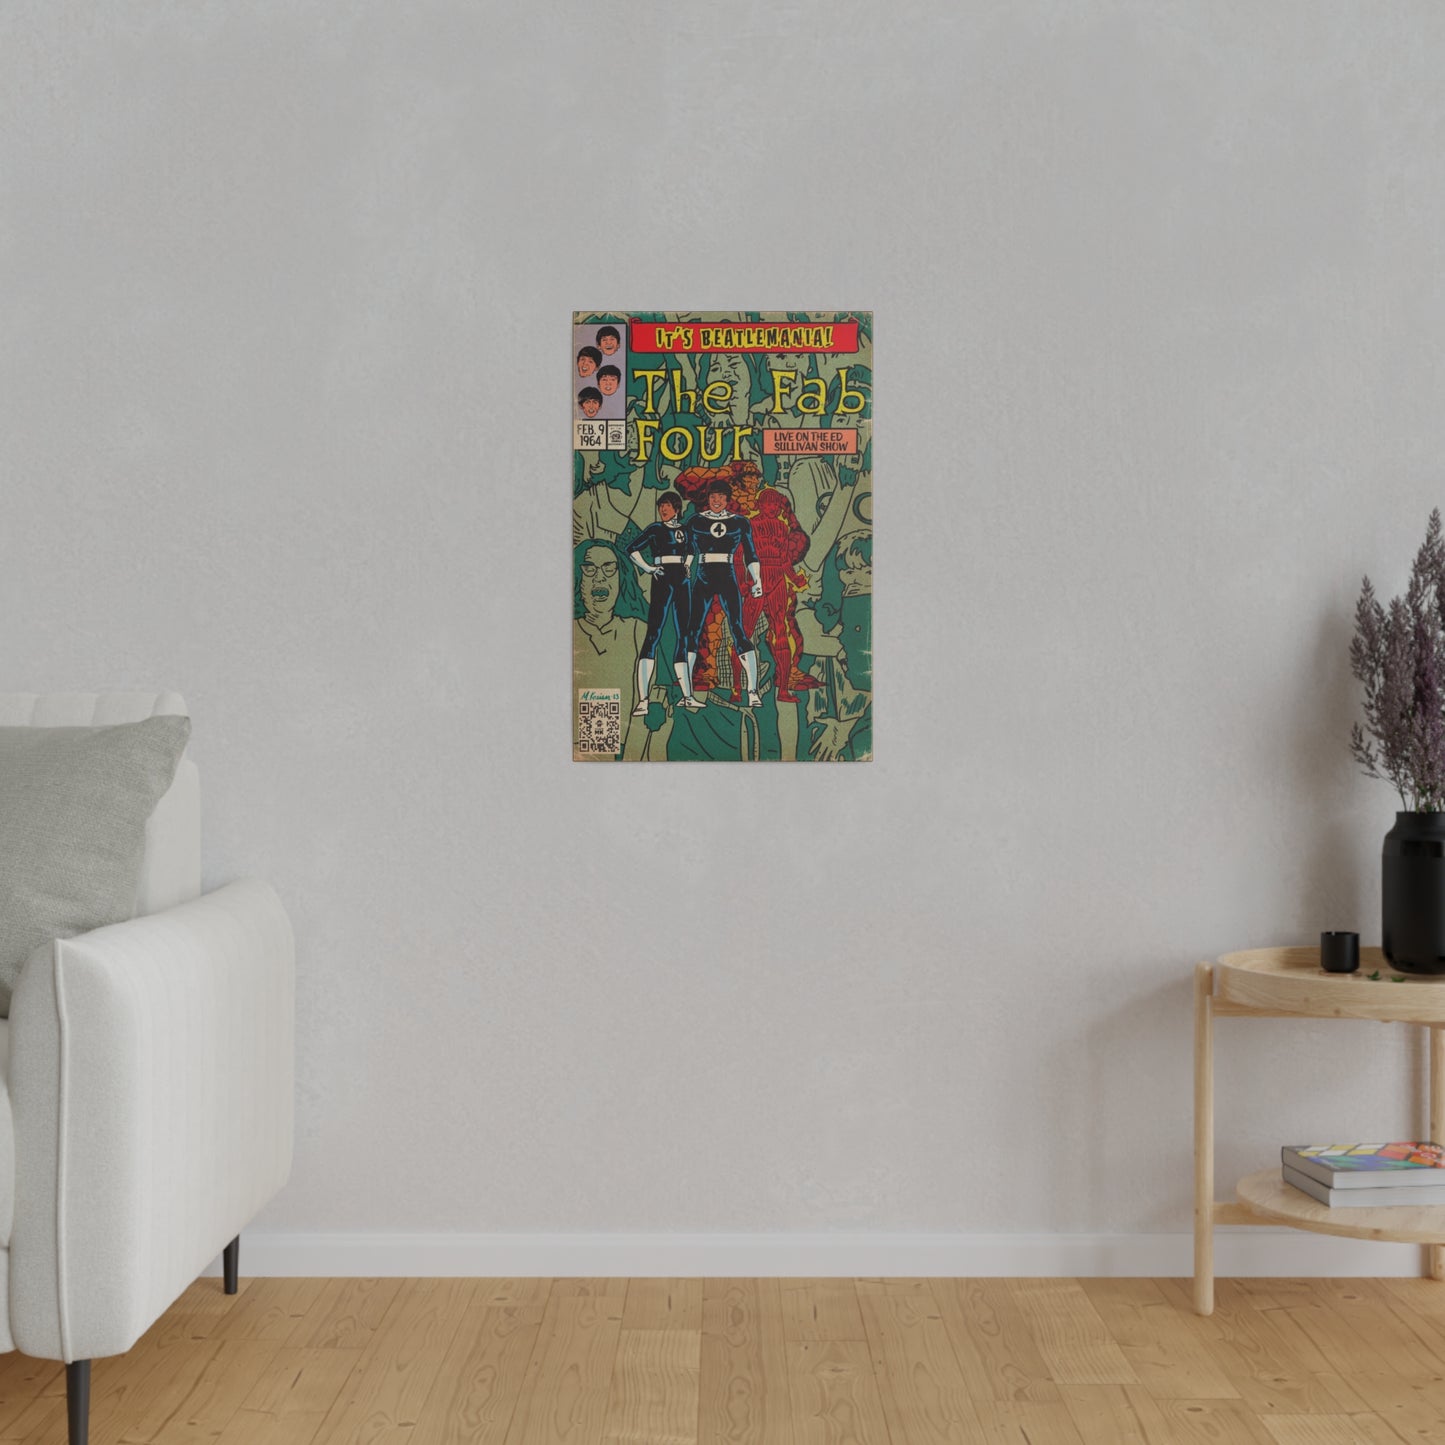 The Beatles - Beatlemania -  Matte Canvas, Stretched, 0.75"